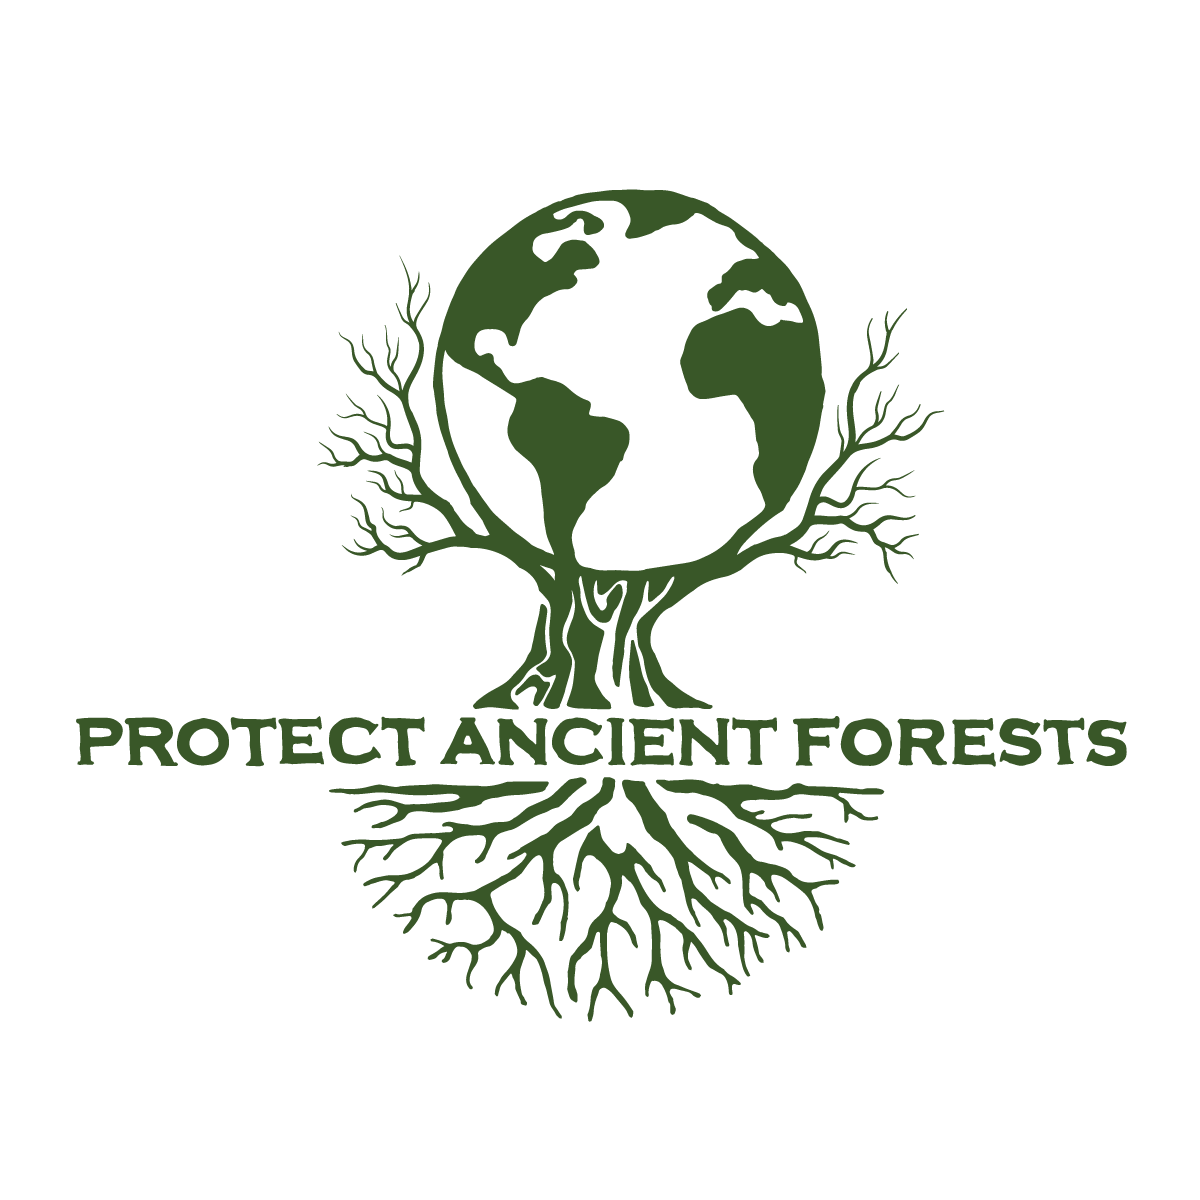 Protect Ancient Forests